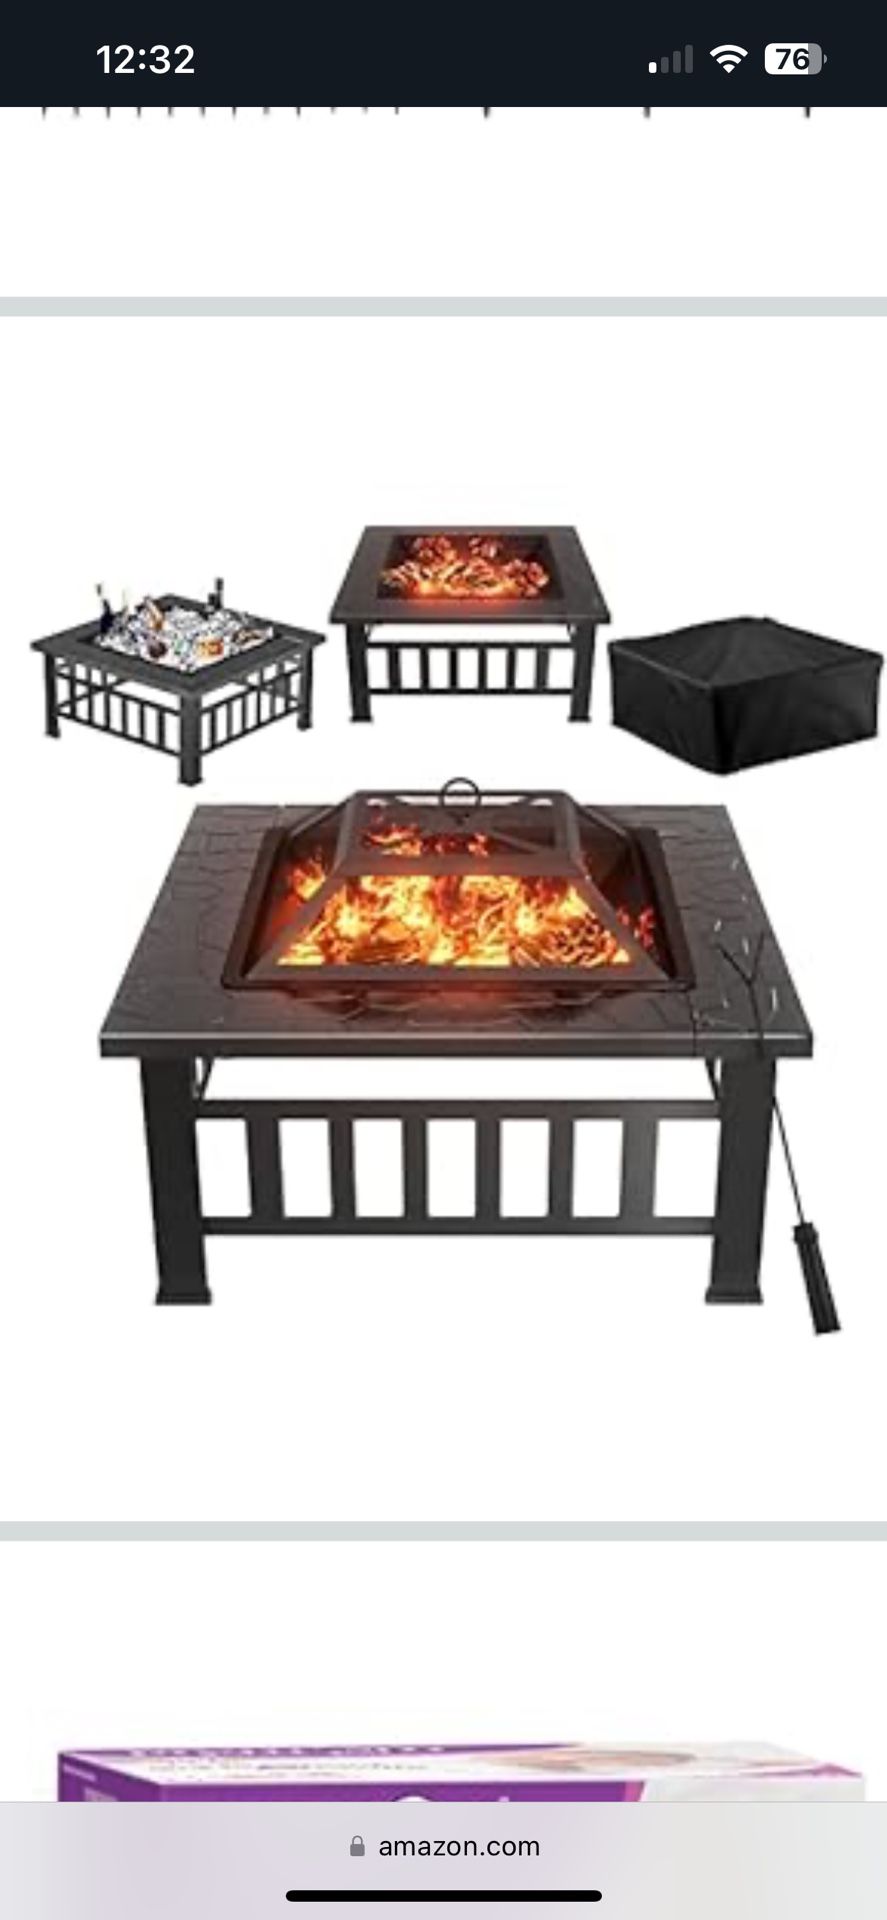 3 In 1 Bonfire Pit / Ice Chest / Bbq Grill